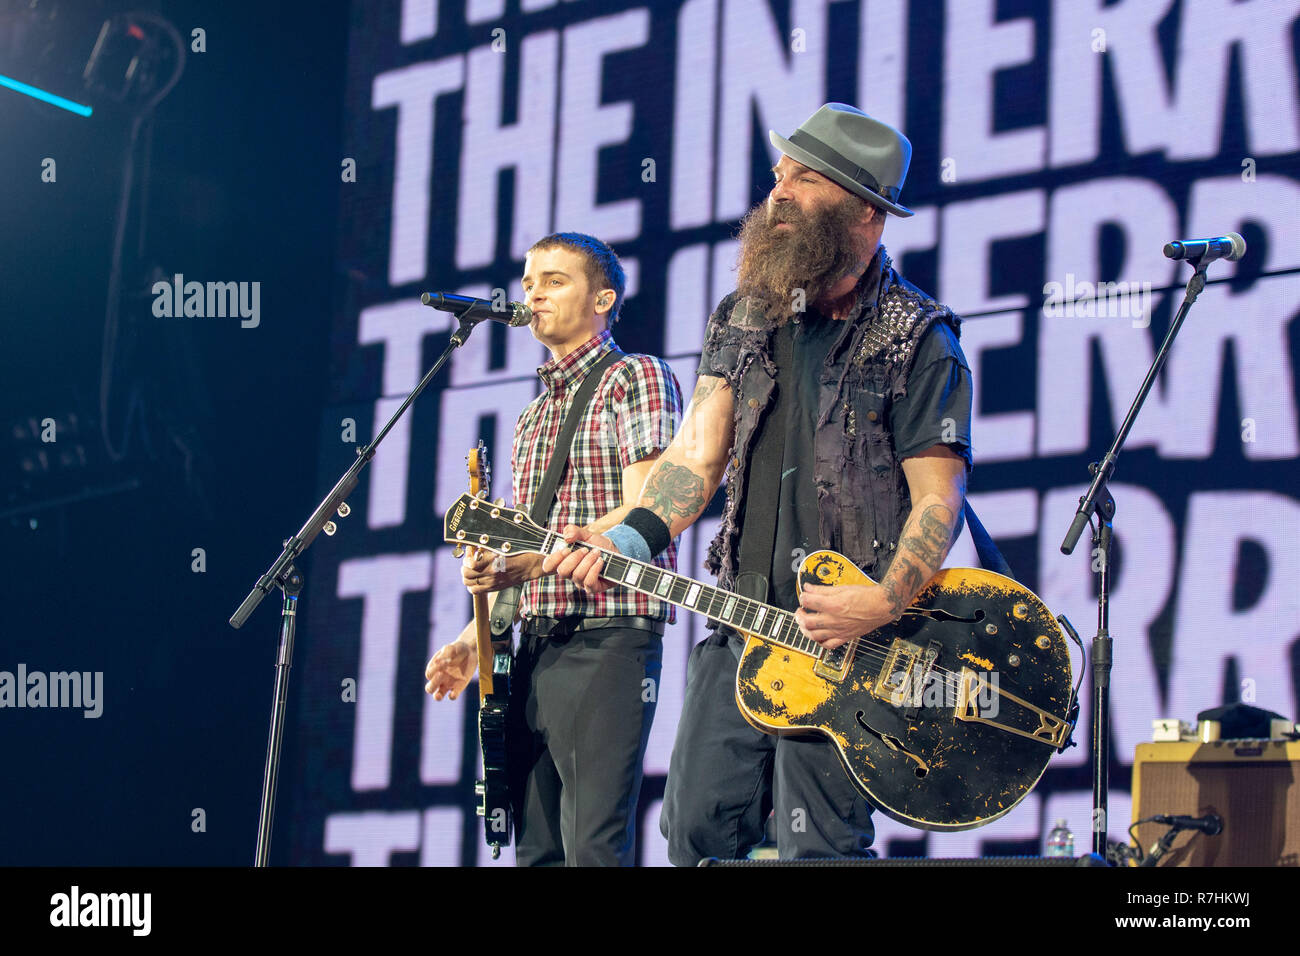 Inglewood, California, USA. 8th Dec, 2018. KEVIN BIVONA and TIM ARMSTRONG (Rancid) of The Interrupters during the KROQ Absolut Almost Acoustic Christmas Concert at The Forum in Inglewood, California Credit: Daniel DeSlover/ZUMA Wire/Alamy Live News Stock Photo